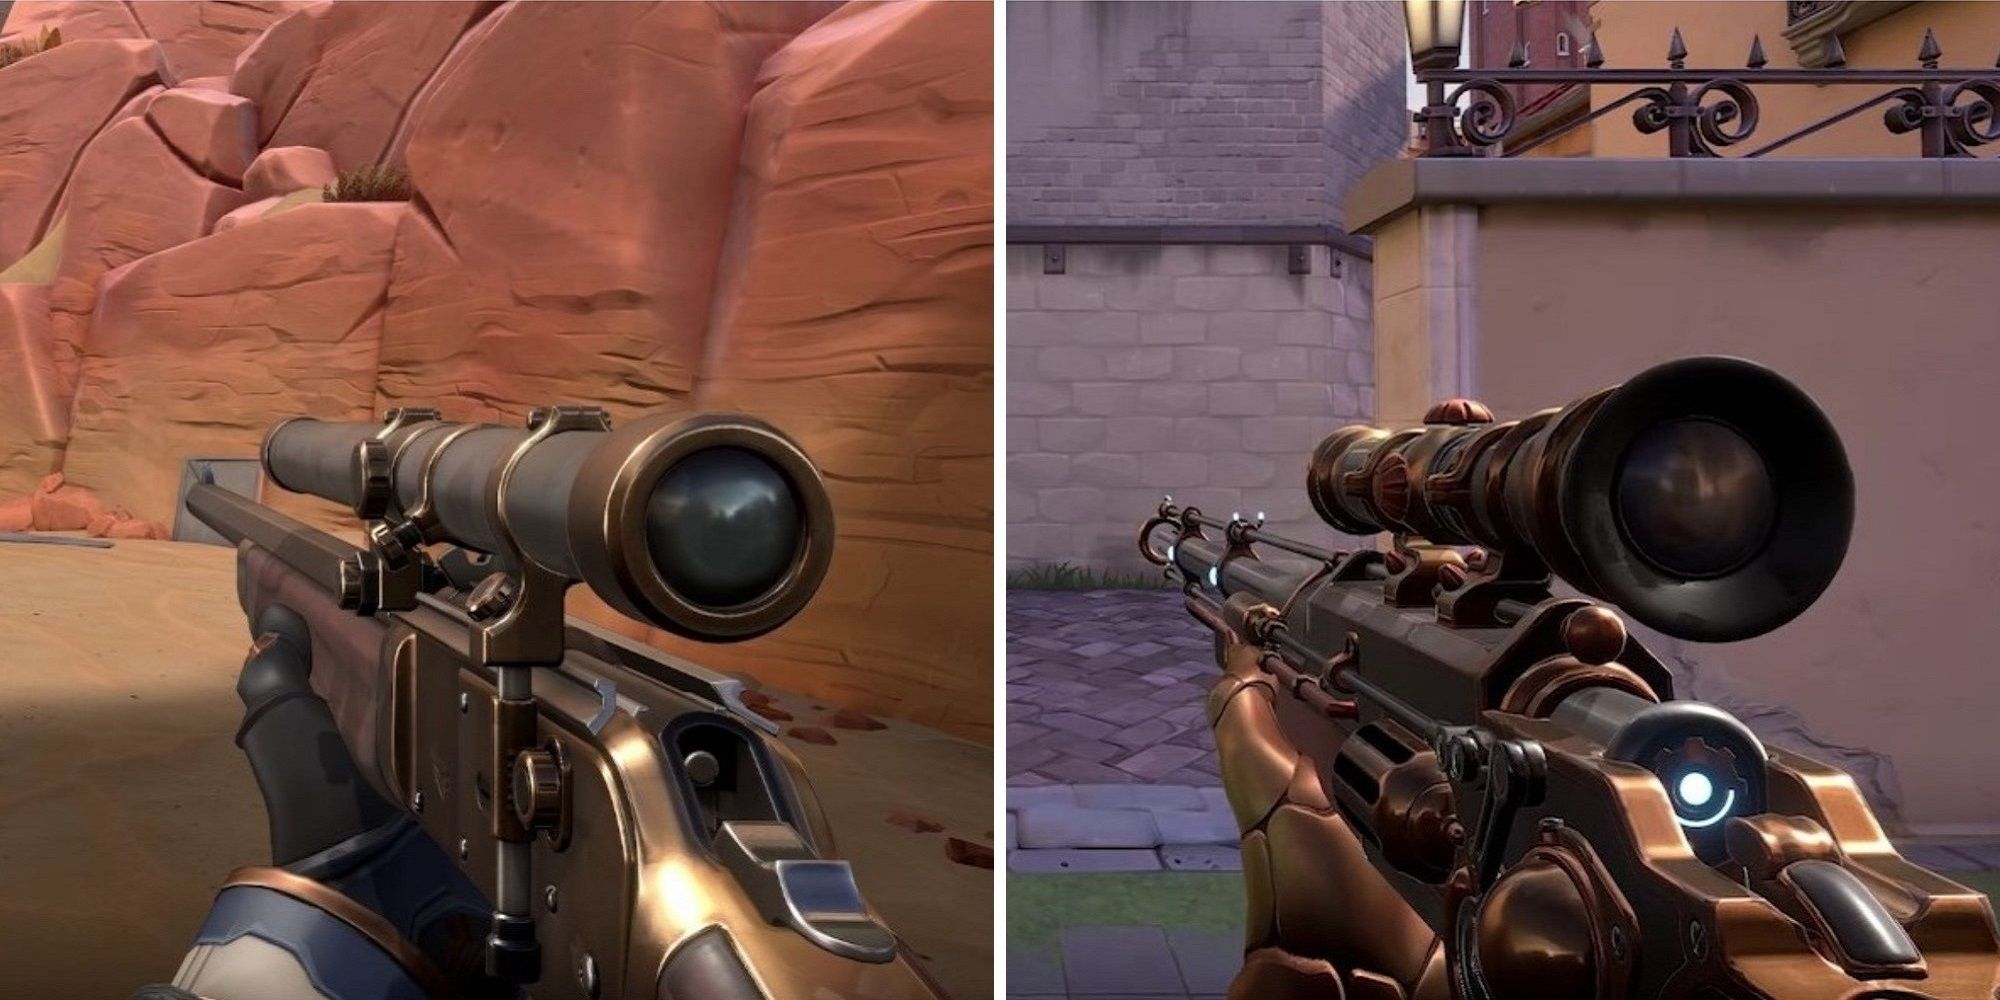 A split image showing two Marshal skins in Valorant.